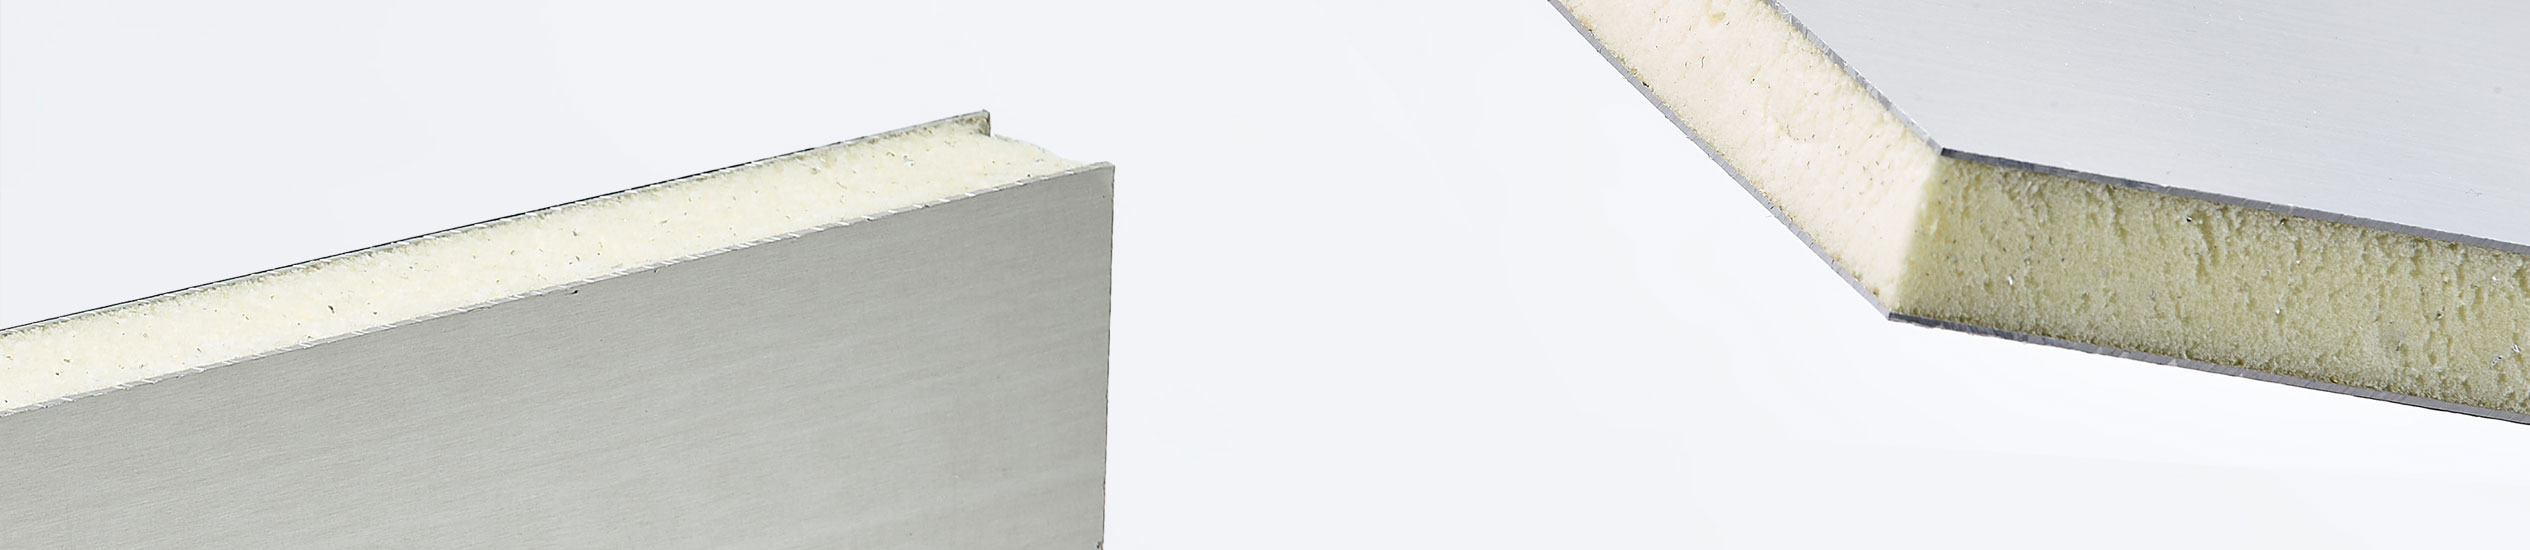 COMPOCEL ALF is a lightweight panel composed by a core in EPS "extruded polystyrene" and bonded with aluminium faces.Foam core is offered in different densities